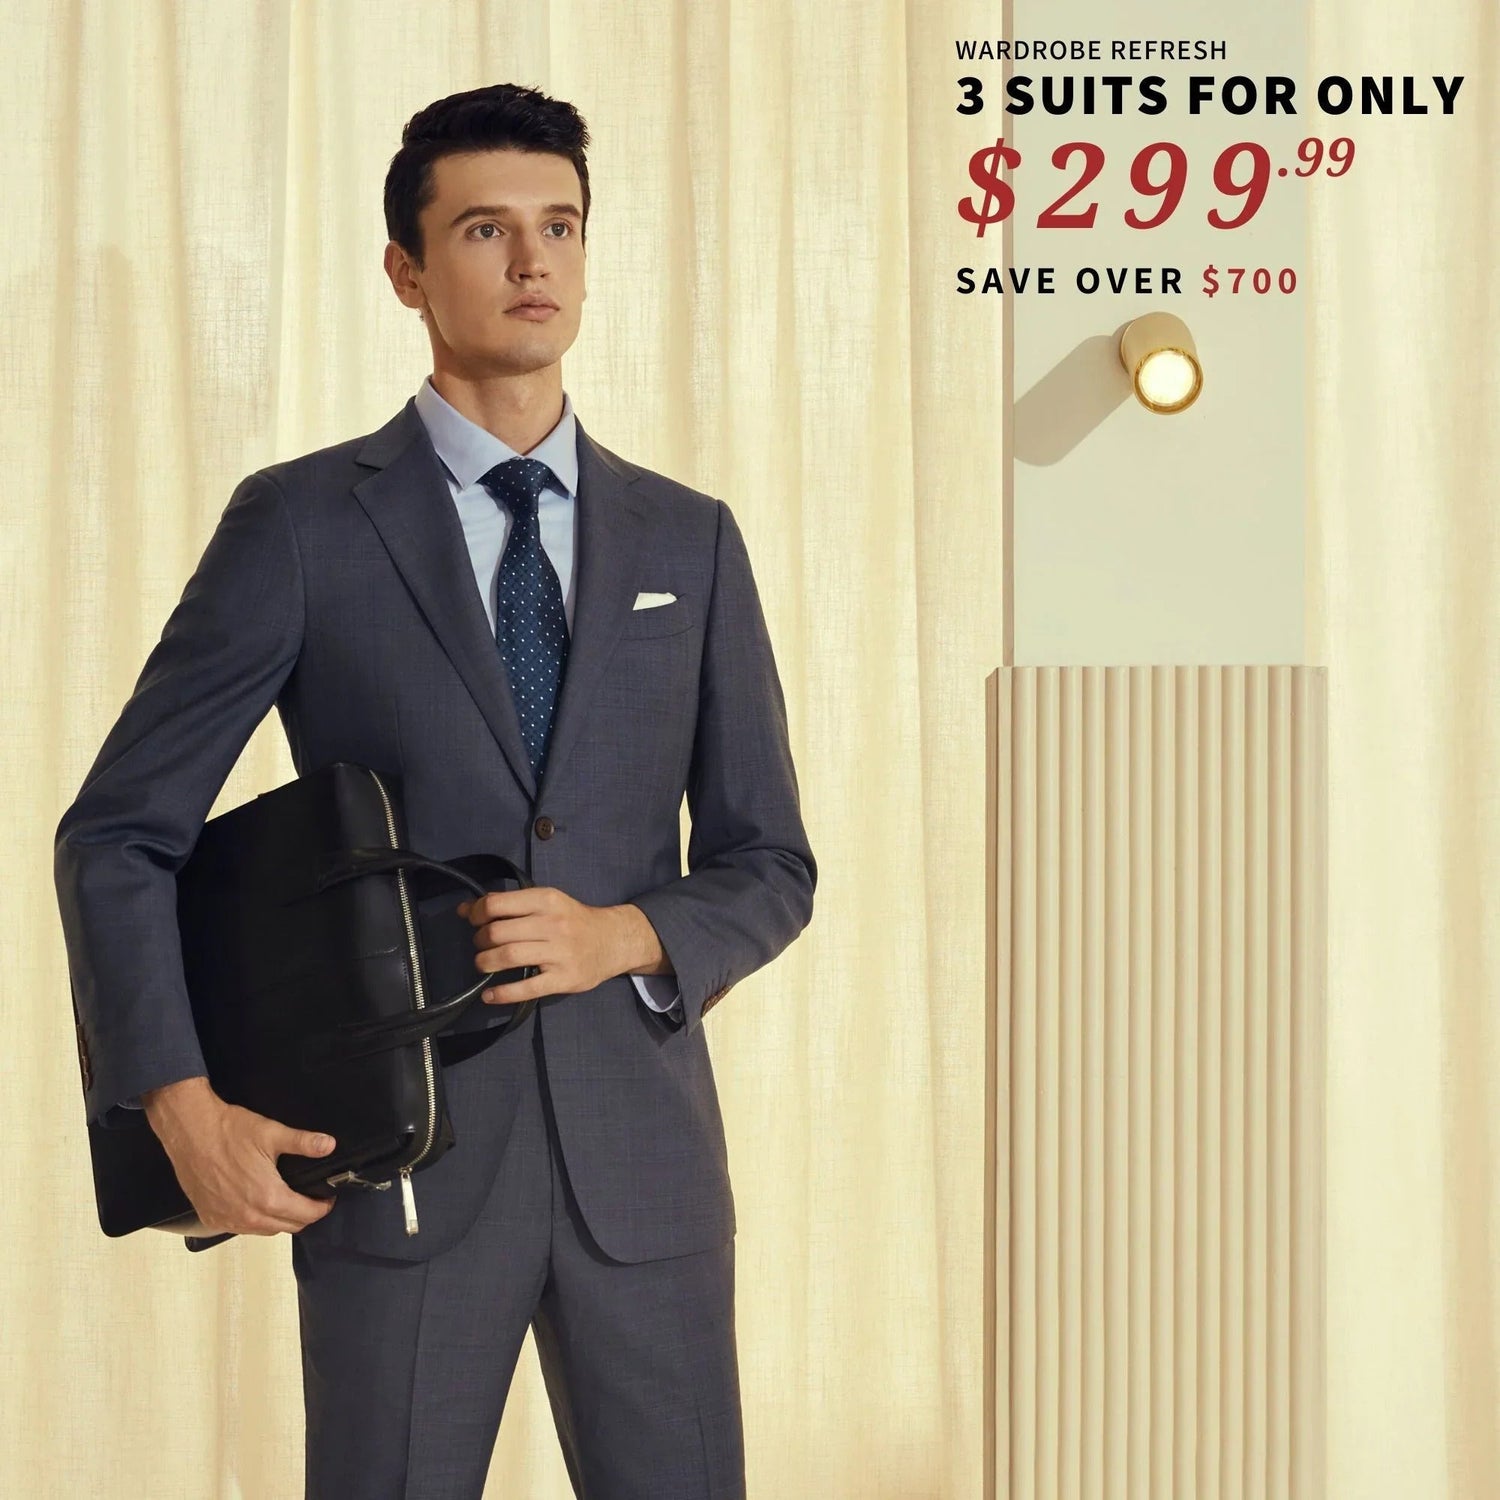 A man in a suit is holding a BYOB briefcase, checking the jacket size for 3 Suits for $299.